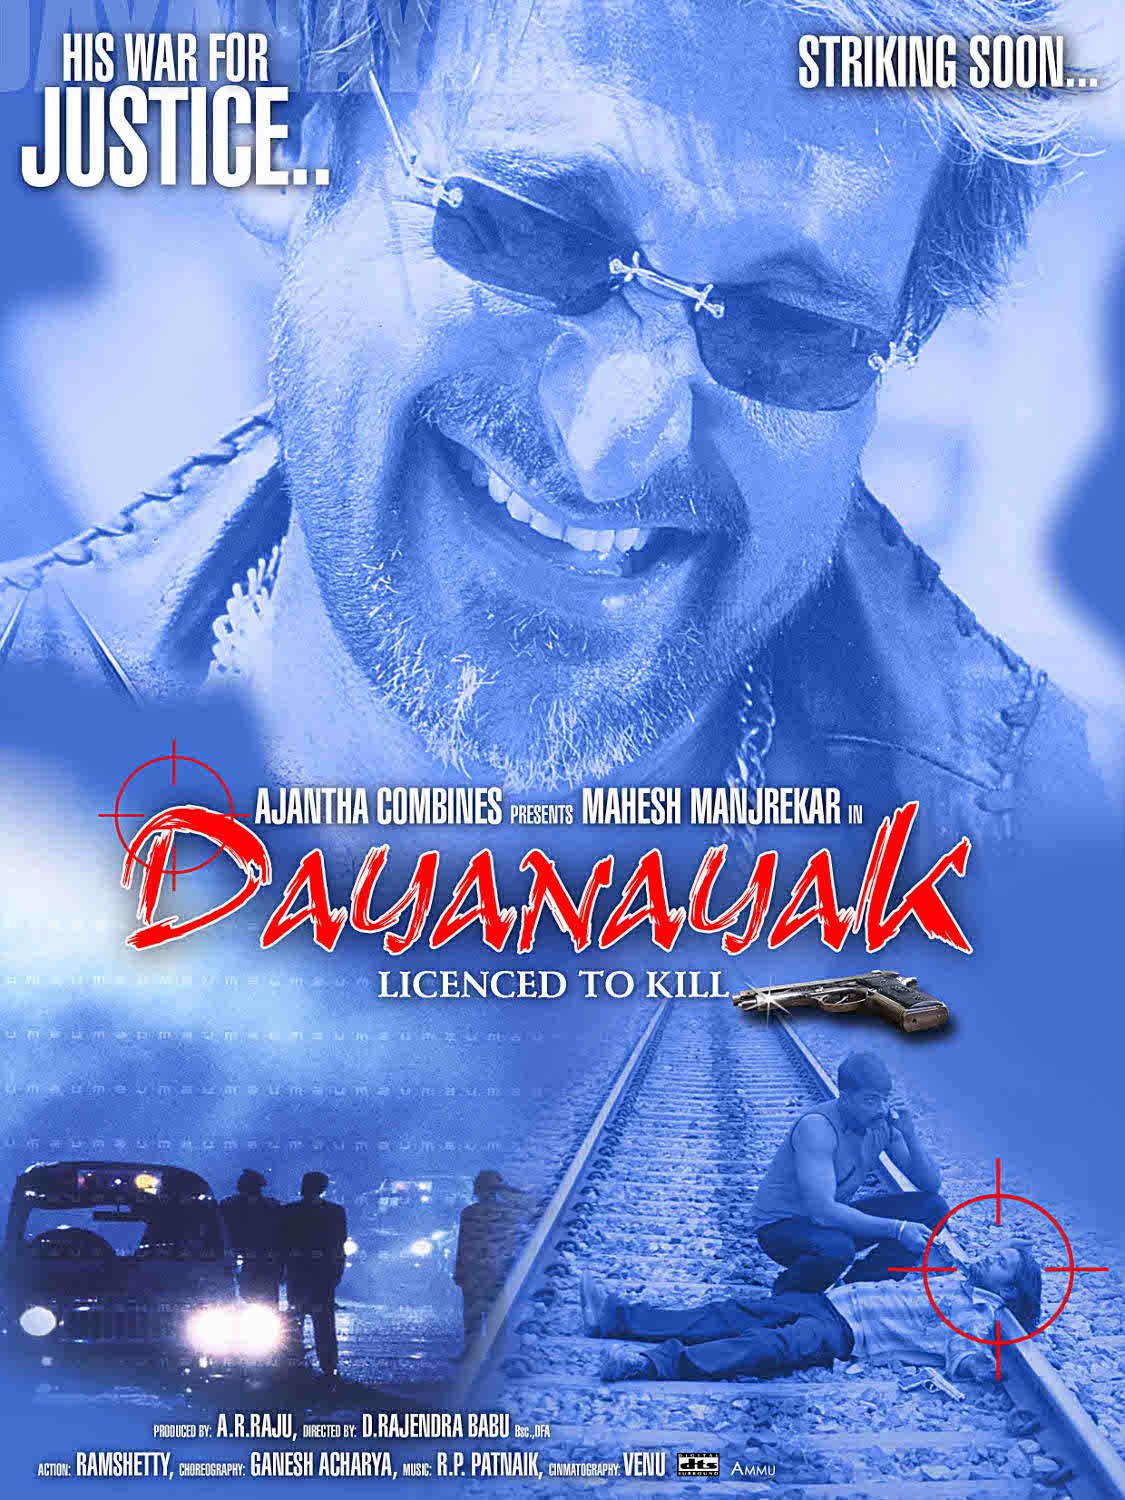 Extra Large Movie Poster Image for Encounter Dayanayak (#11 of 18)